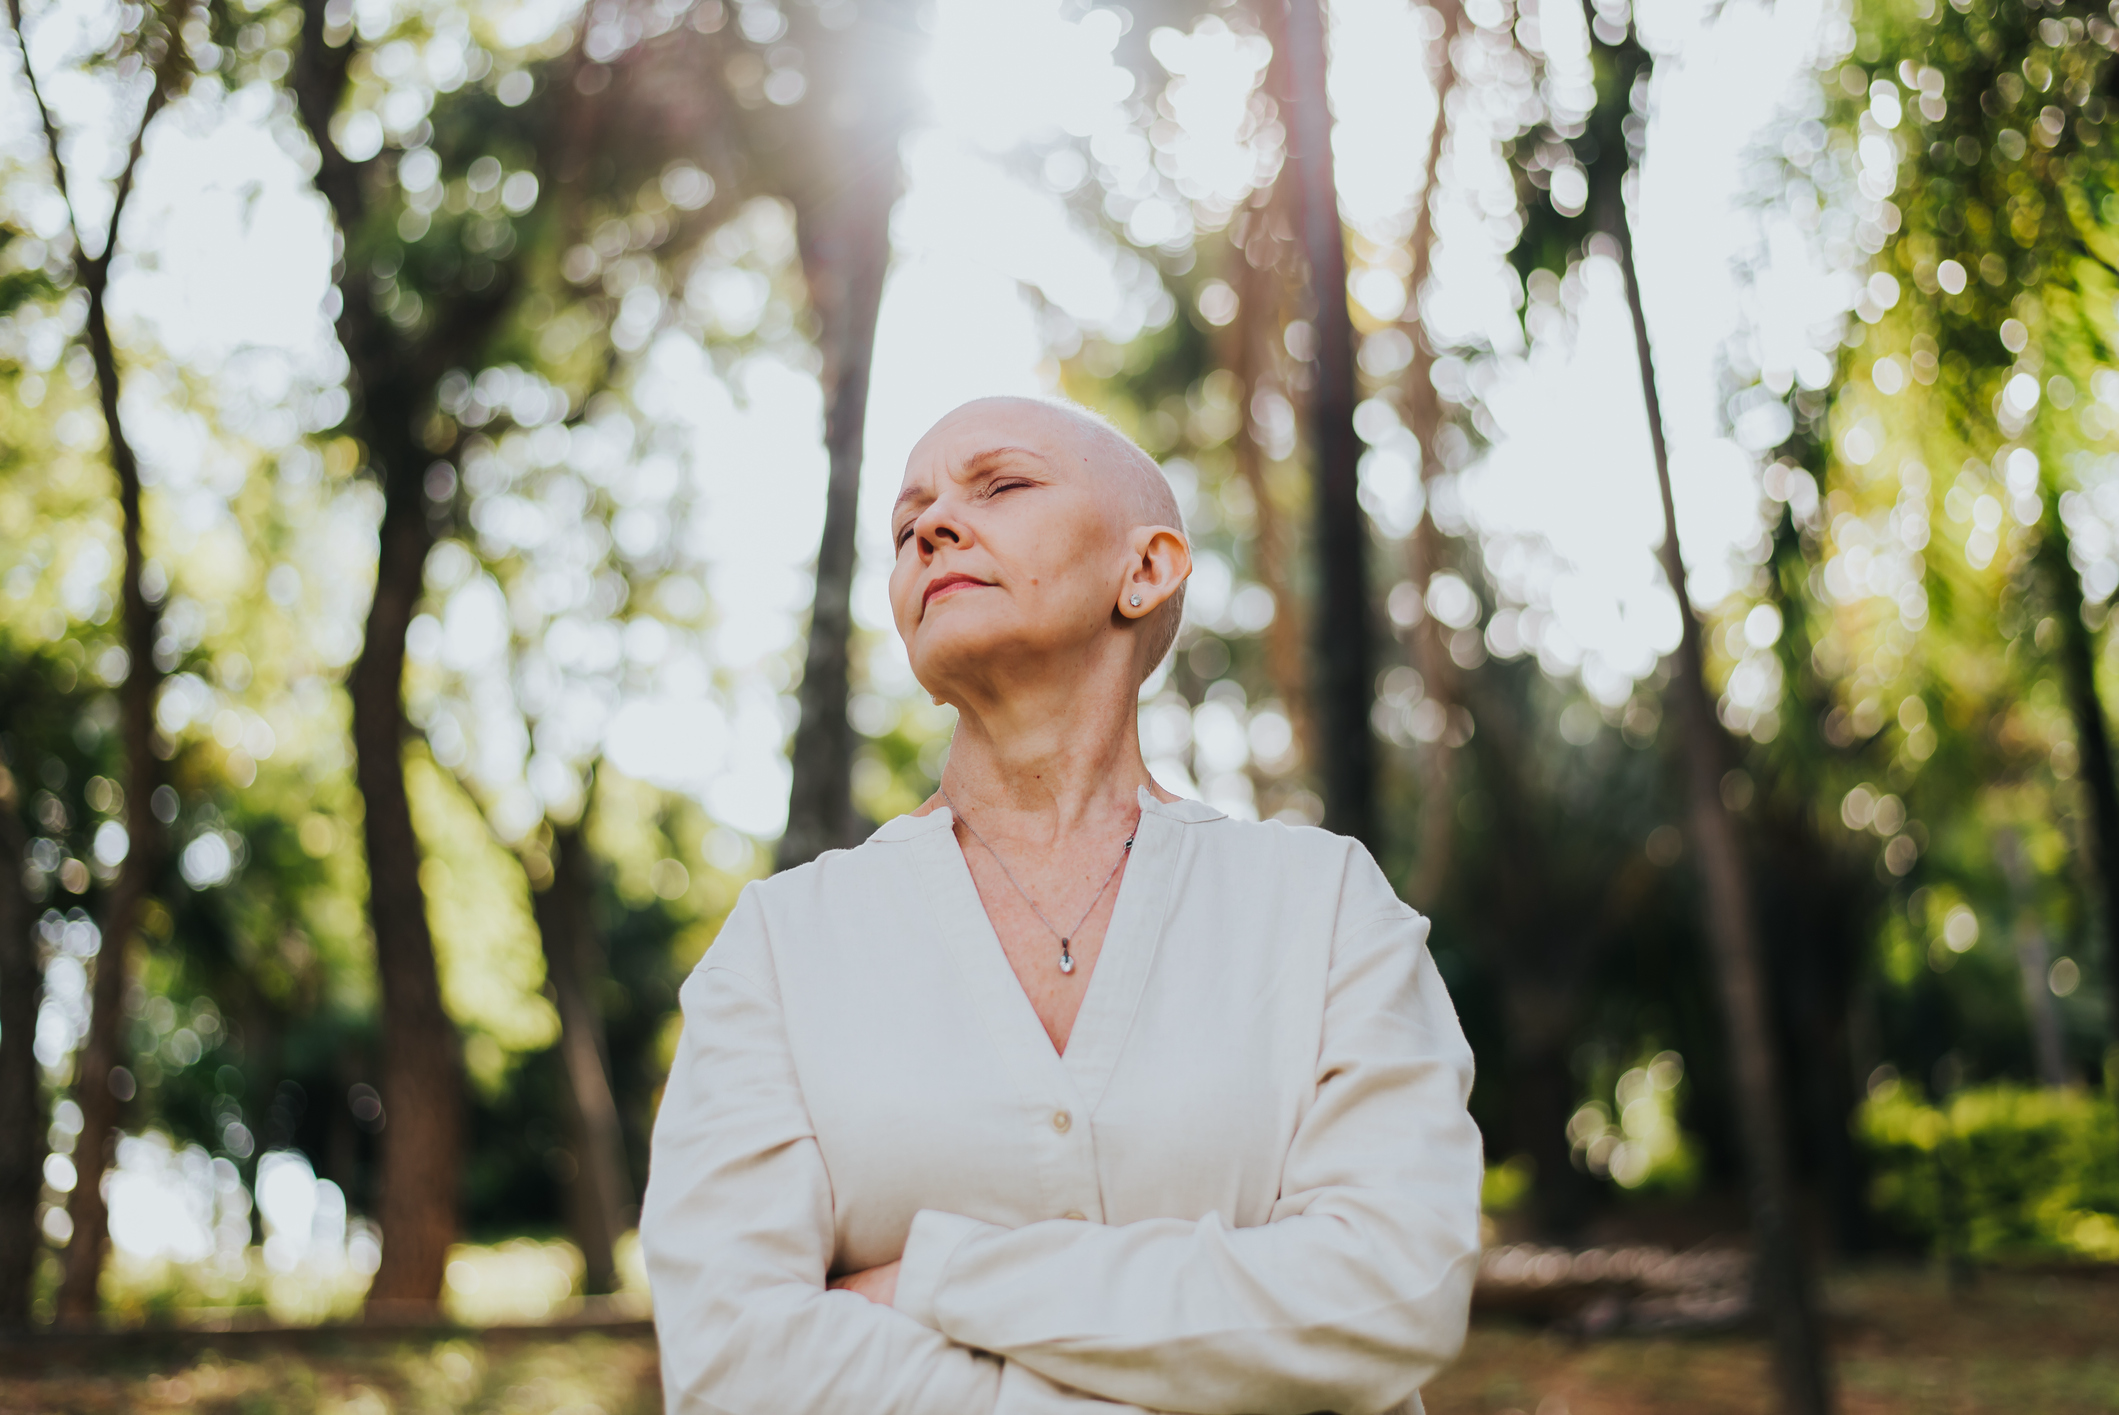 Woman with lung cancer at peace in nature